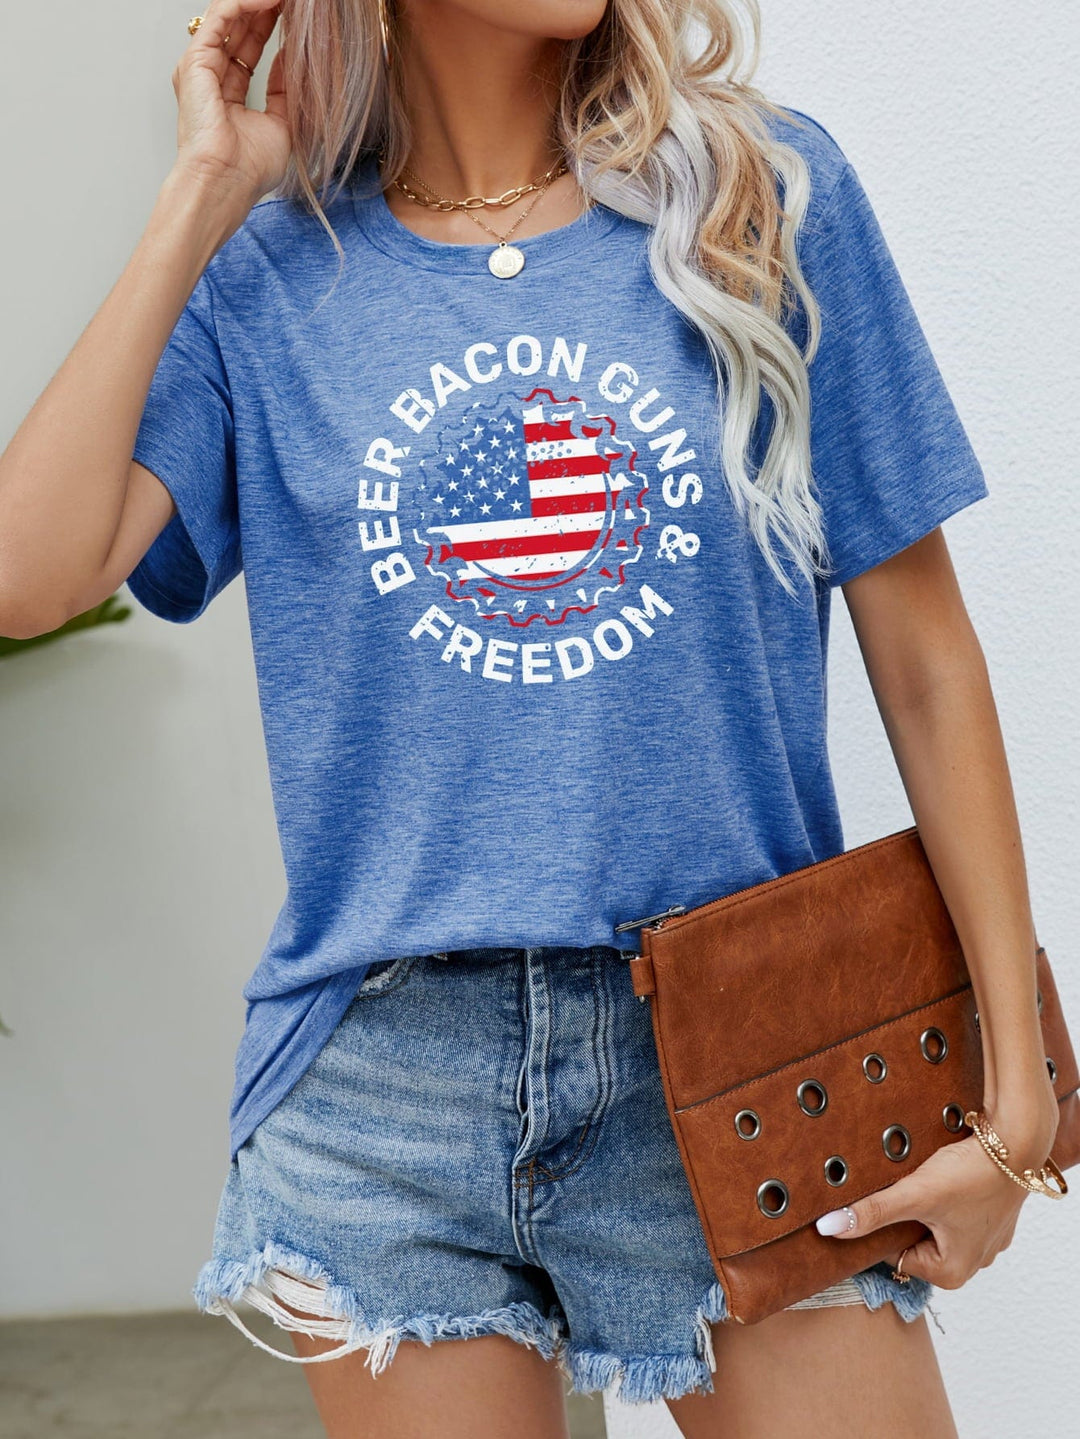 The802Gypsy shirts and tops Cobalt Blue / S GYPSY-BEER BACON GUNS & FREEDOM US Flag Graphic Tee